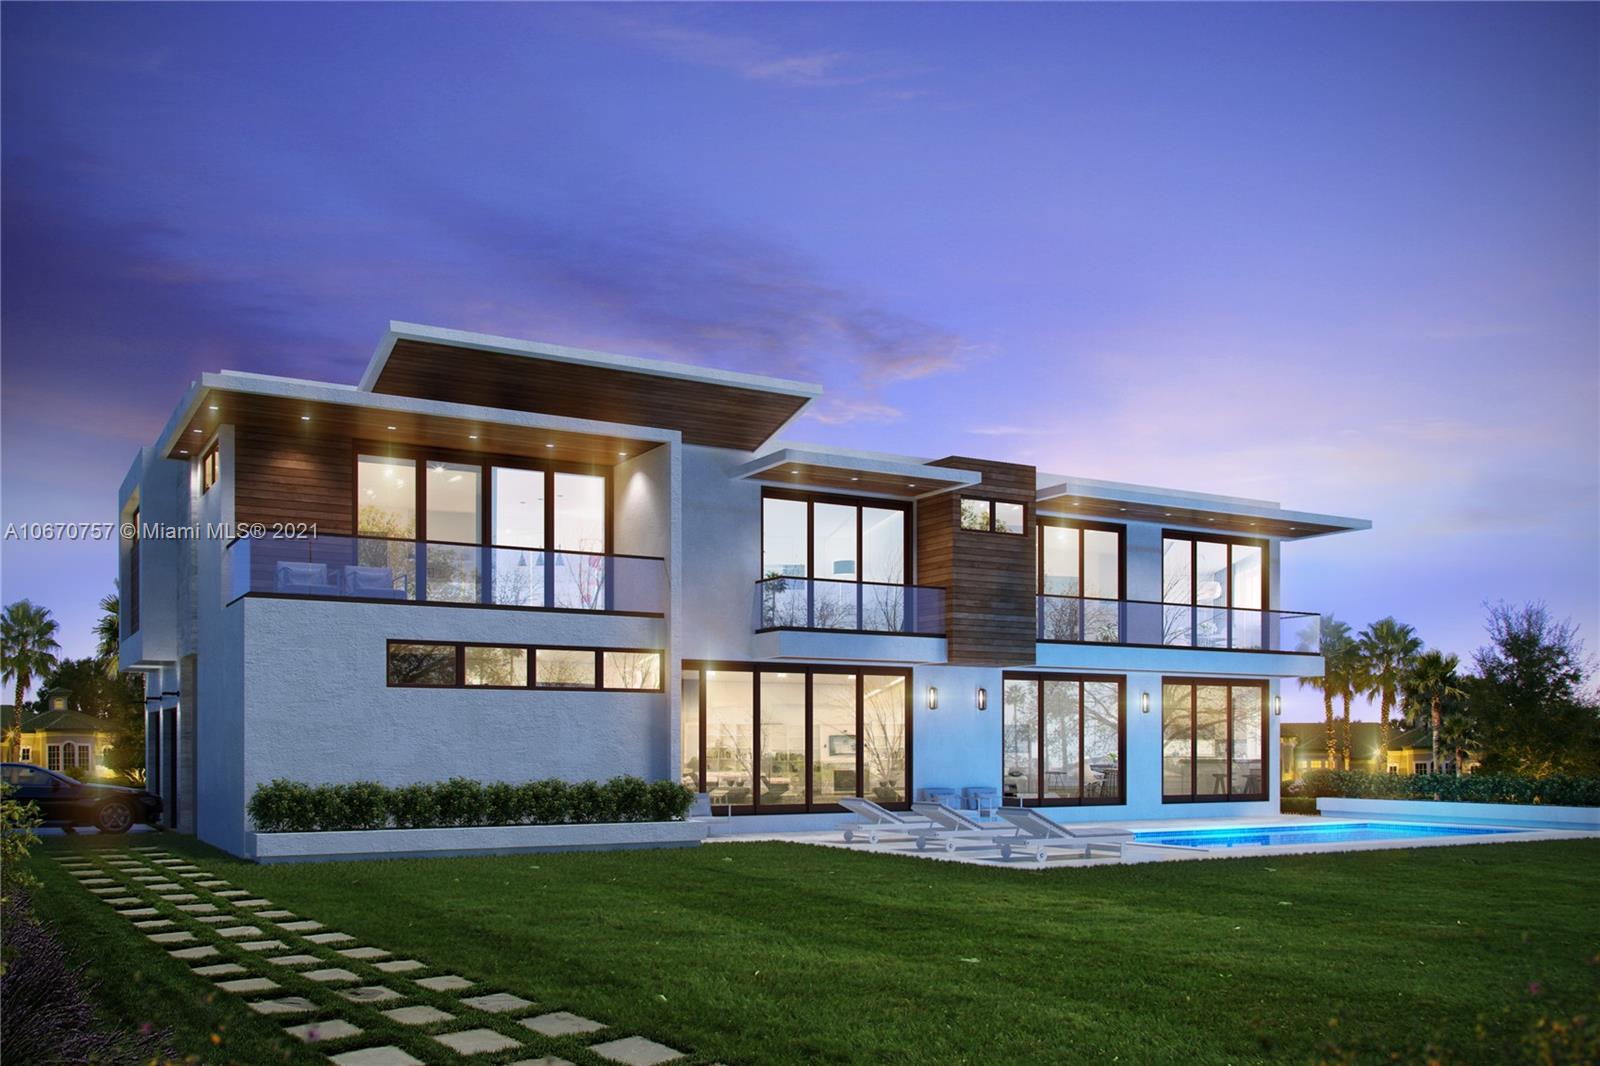 New Construction Modern & gorgeous masterpiece ideally situated in the prestigious Ponce-Davis neighborhood. 2-story estate on a ¼ acre corner lot, surrounded by majestic oaks, on highly desirable Davis Rd 1-block west of Ponce. 5,564 SF of LA under 4 AC zones with 5BD/4BA upstairs, and 1BD/1.5BA downstairs. 2-car garage & generous open plan living areas opening to heated saline pool and patio with room to play. Easy access gated entry from 50th Ct.   Magnificent features include Wolf, Bosch and Subzero appliances, open concept kitchen, 10’ volume ceilings, modern glass balconies & stairway, outside bbq, gorgeous primary suite with large 23' balcony and 2 huge walk-in closets. All closets have been customized. Make your dream come true in Ponce-Davis!